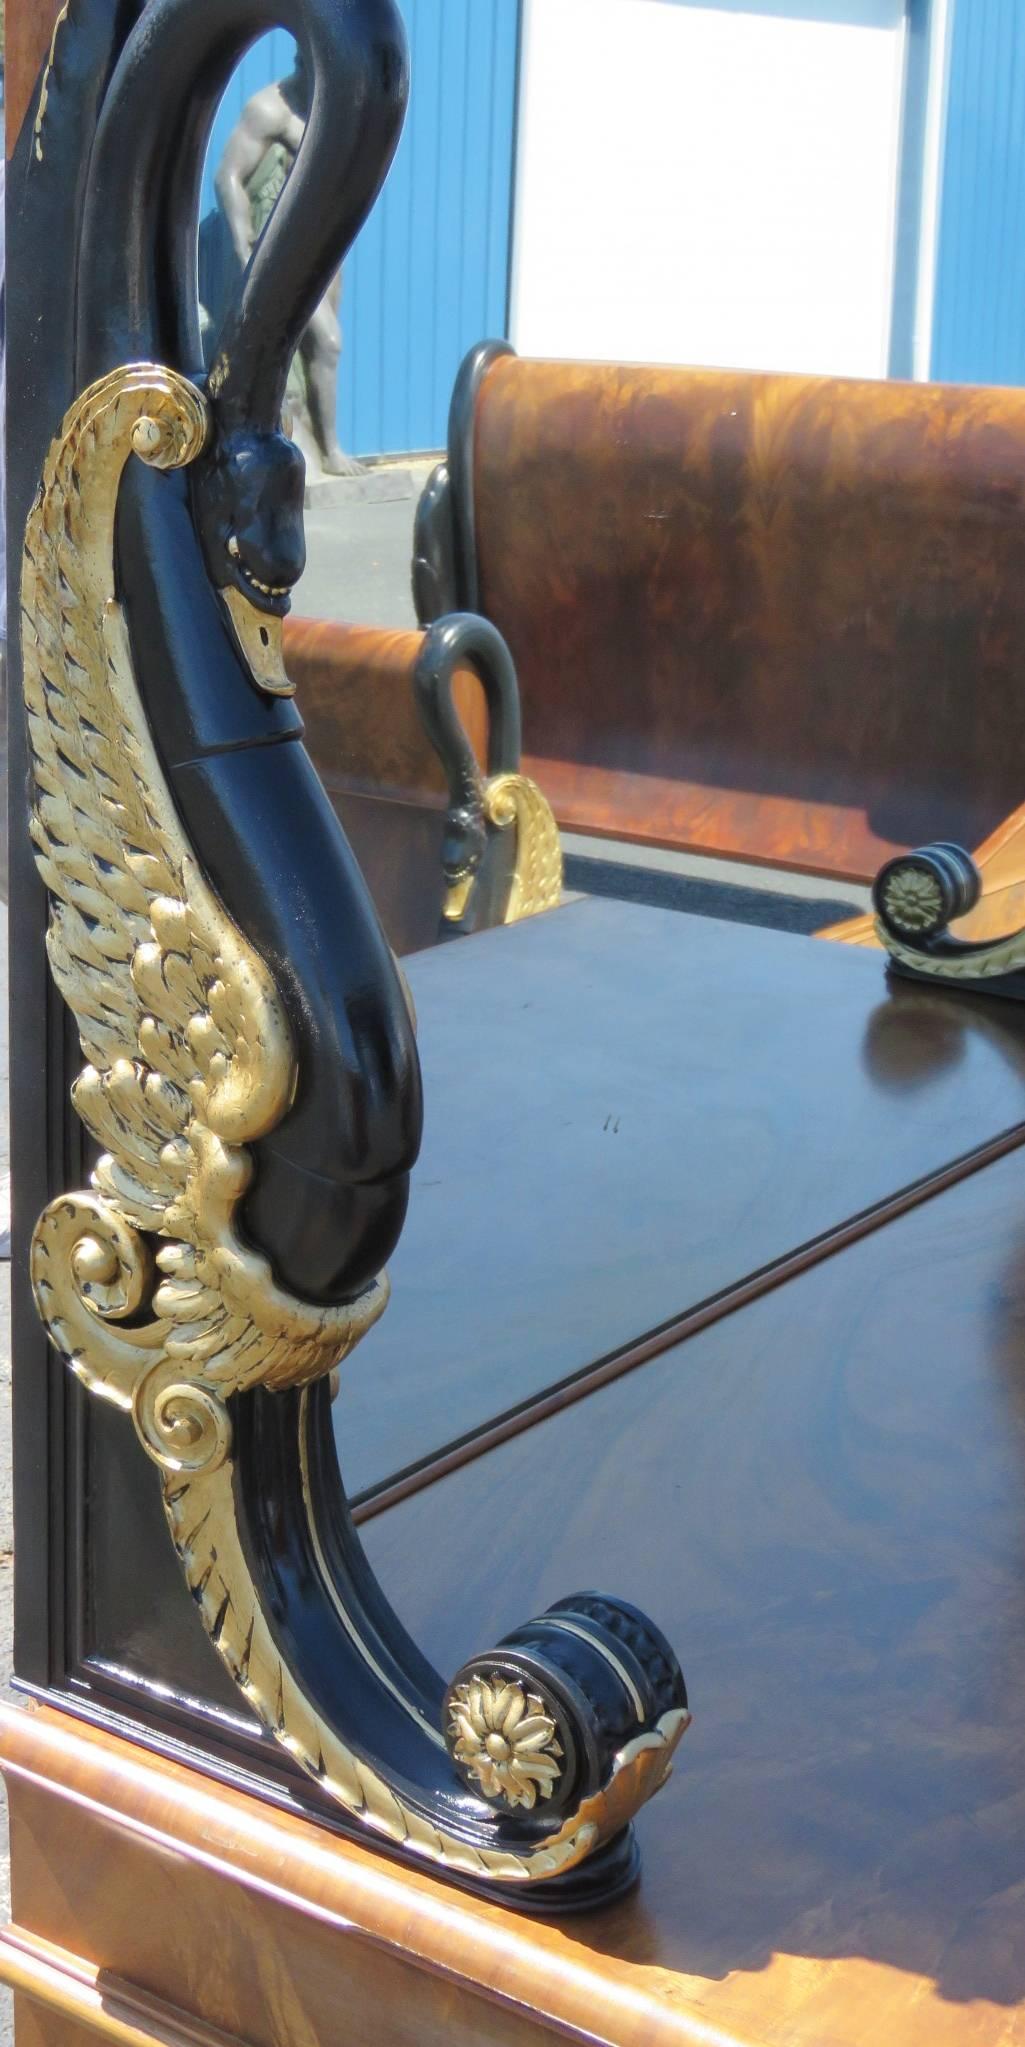 Burl walnut frame brass hardware and mounts. Gilt and ebonized painted carved swans and claw feet. Measures: Dresser 69